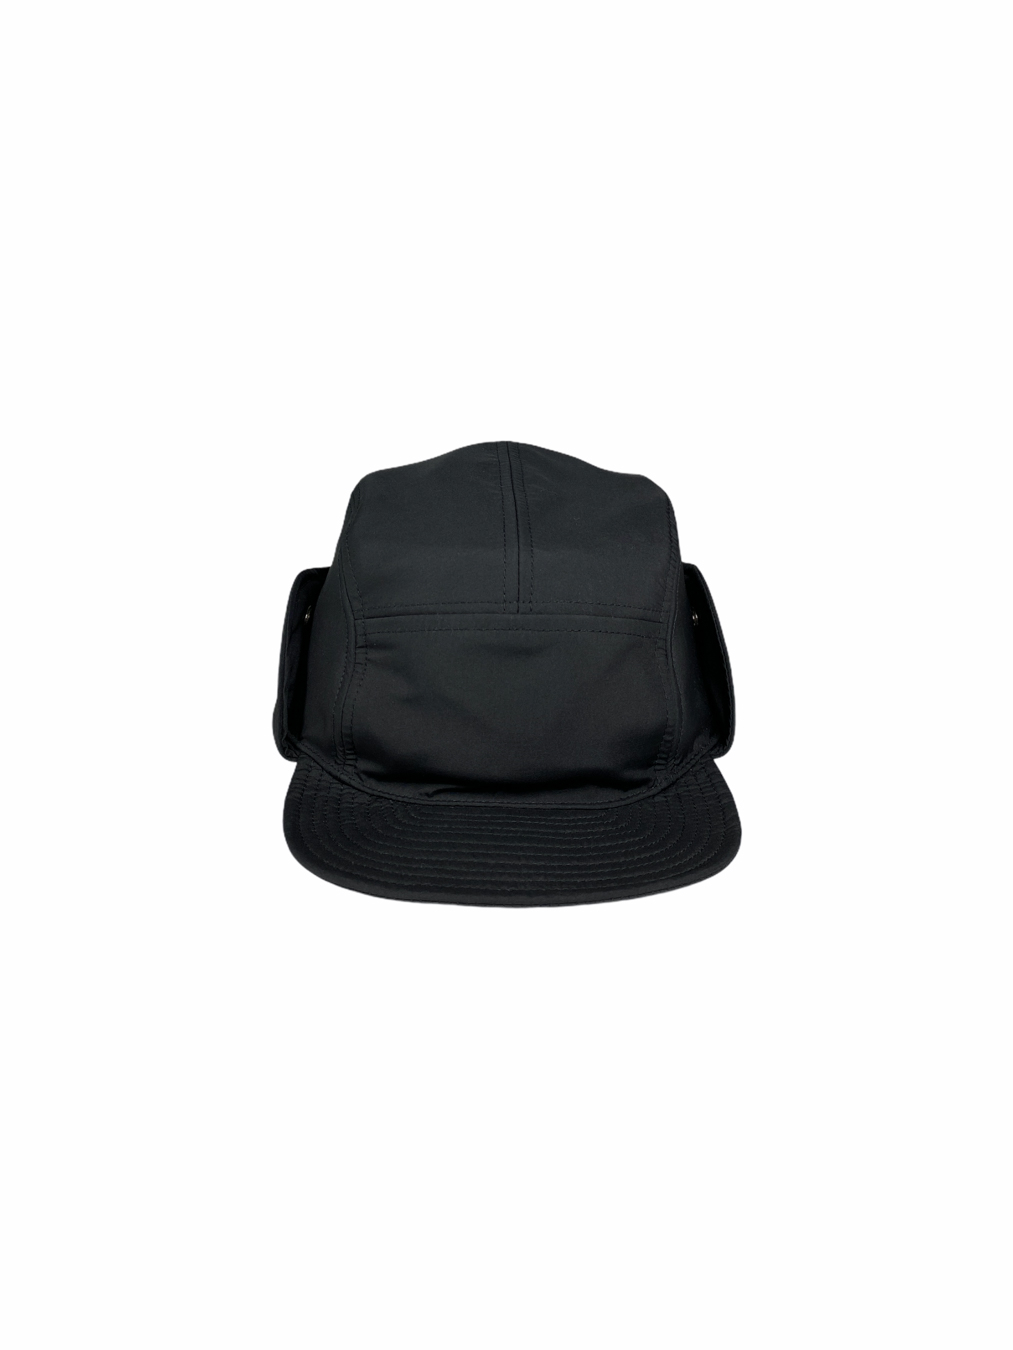 New Camp Cap With Ear Flap (Black) 